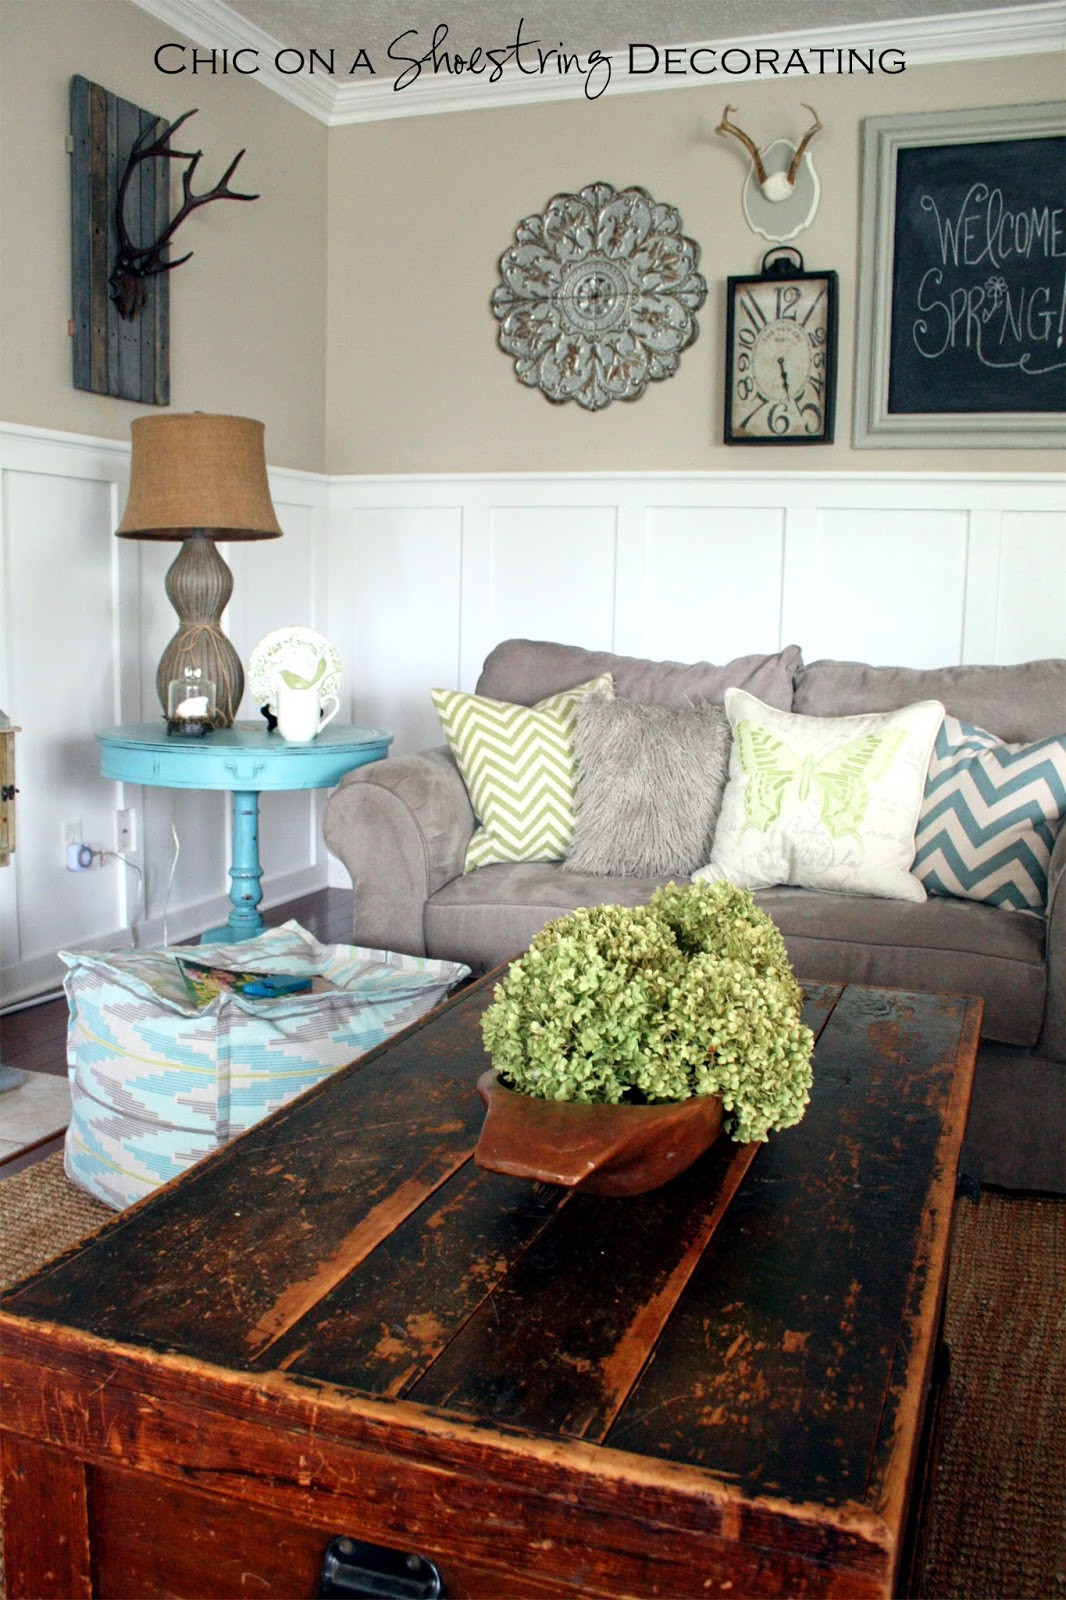 Farmhouse Chic Living Room
 Chic on a Shoestring Decorating My Farmhouse Chic Living